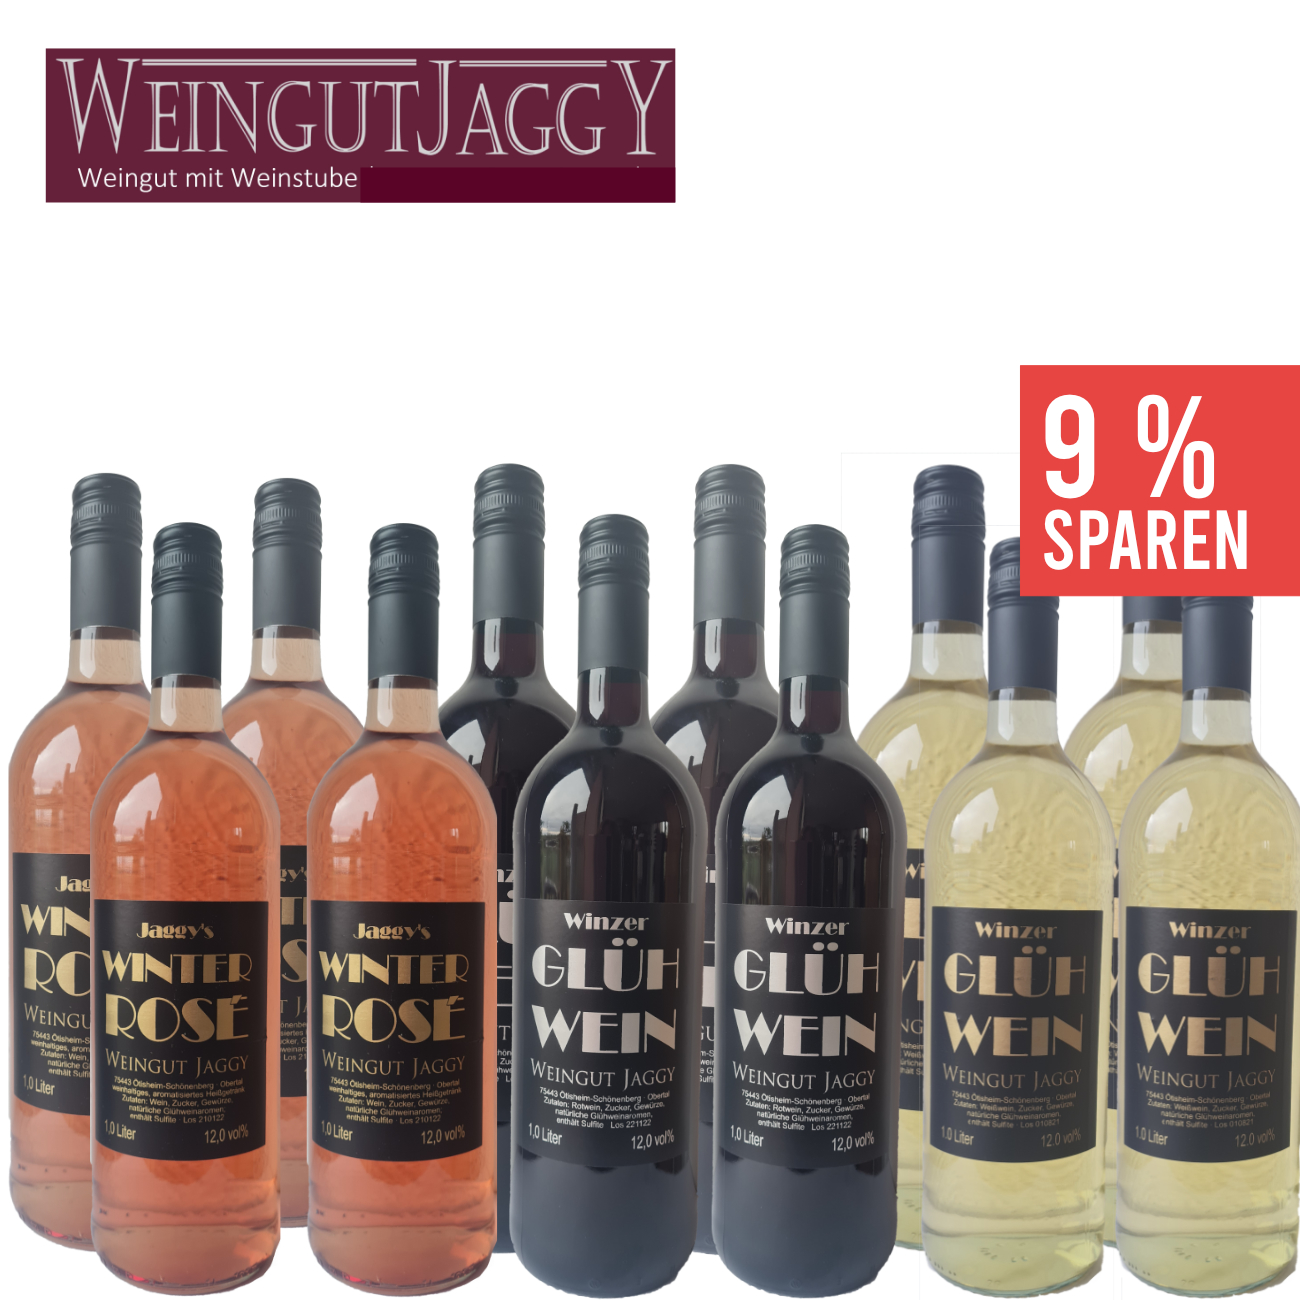 wein.plus find+buy: The wein.plus wines our of | members find+buy